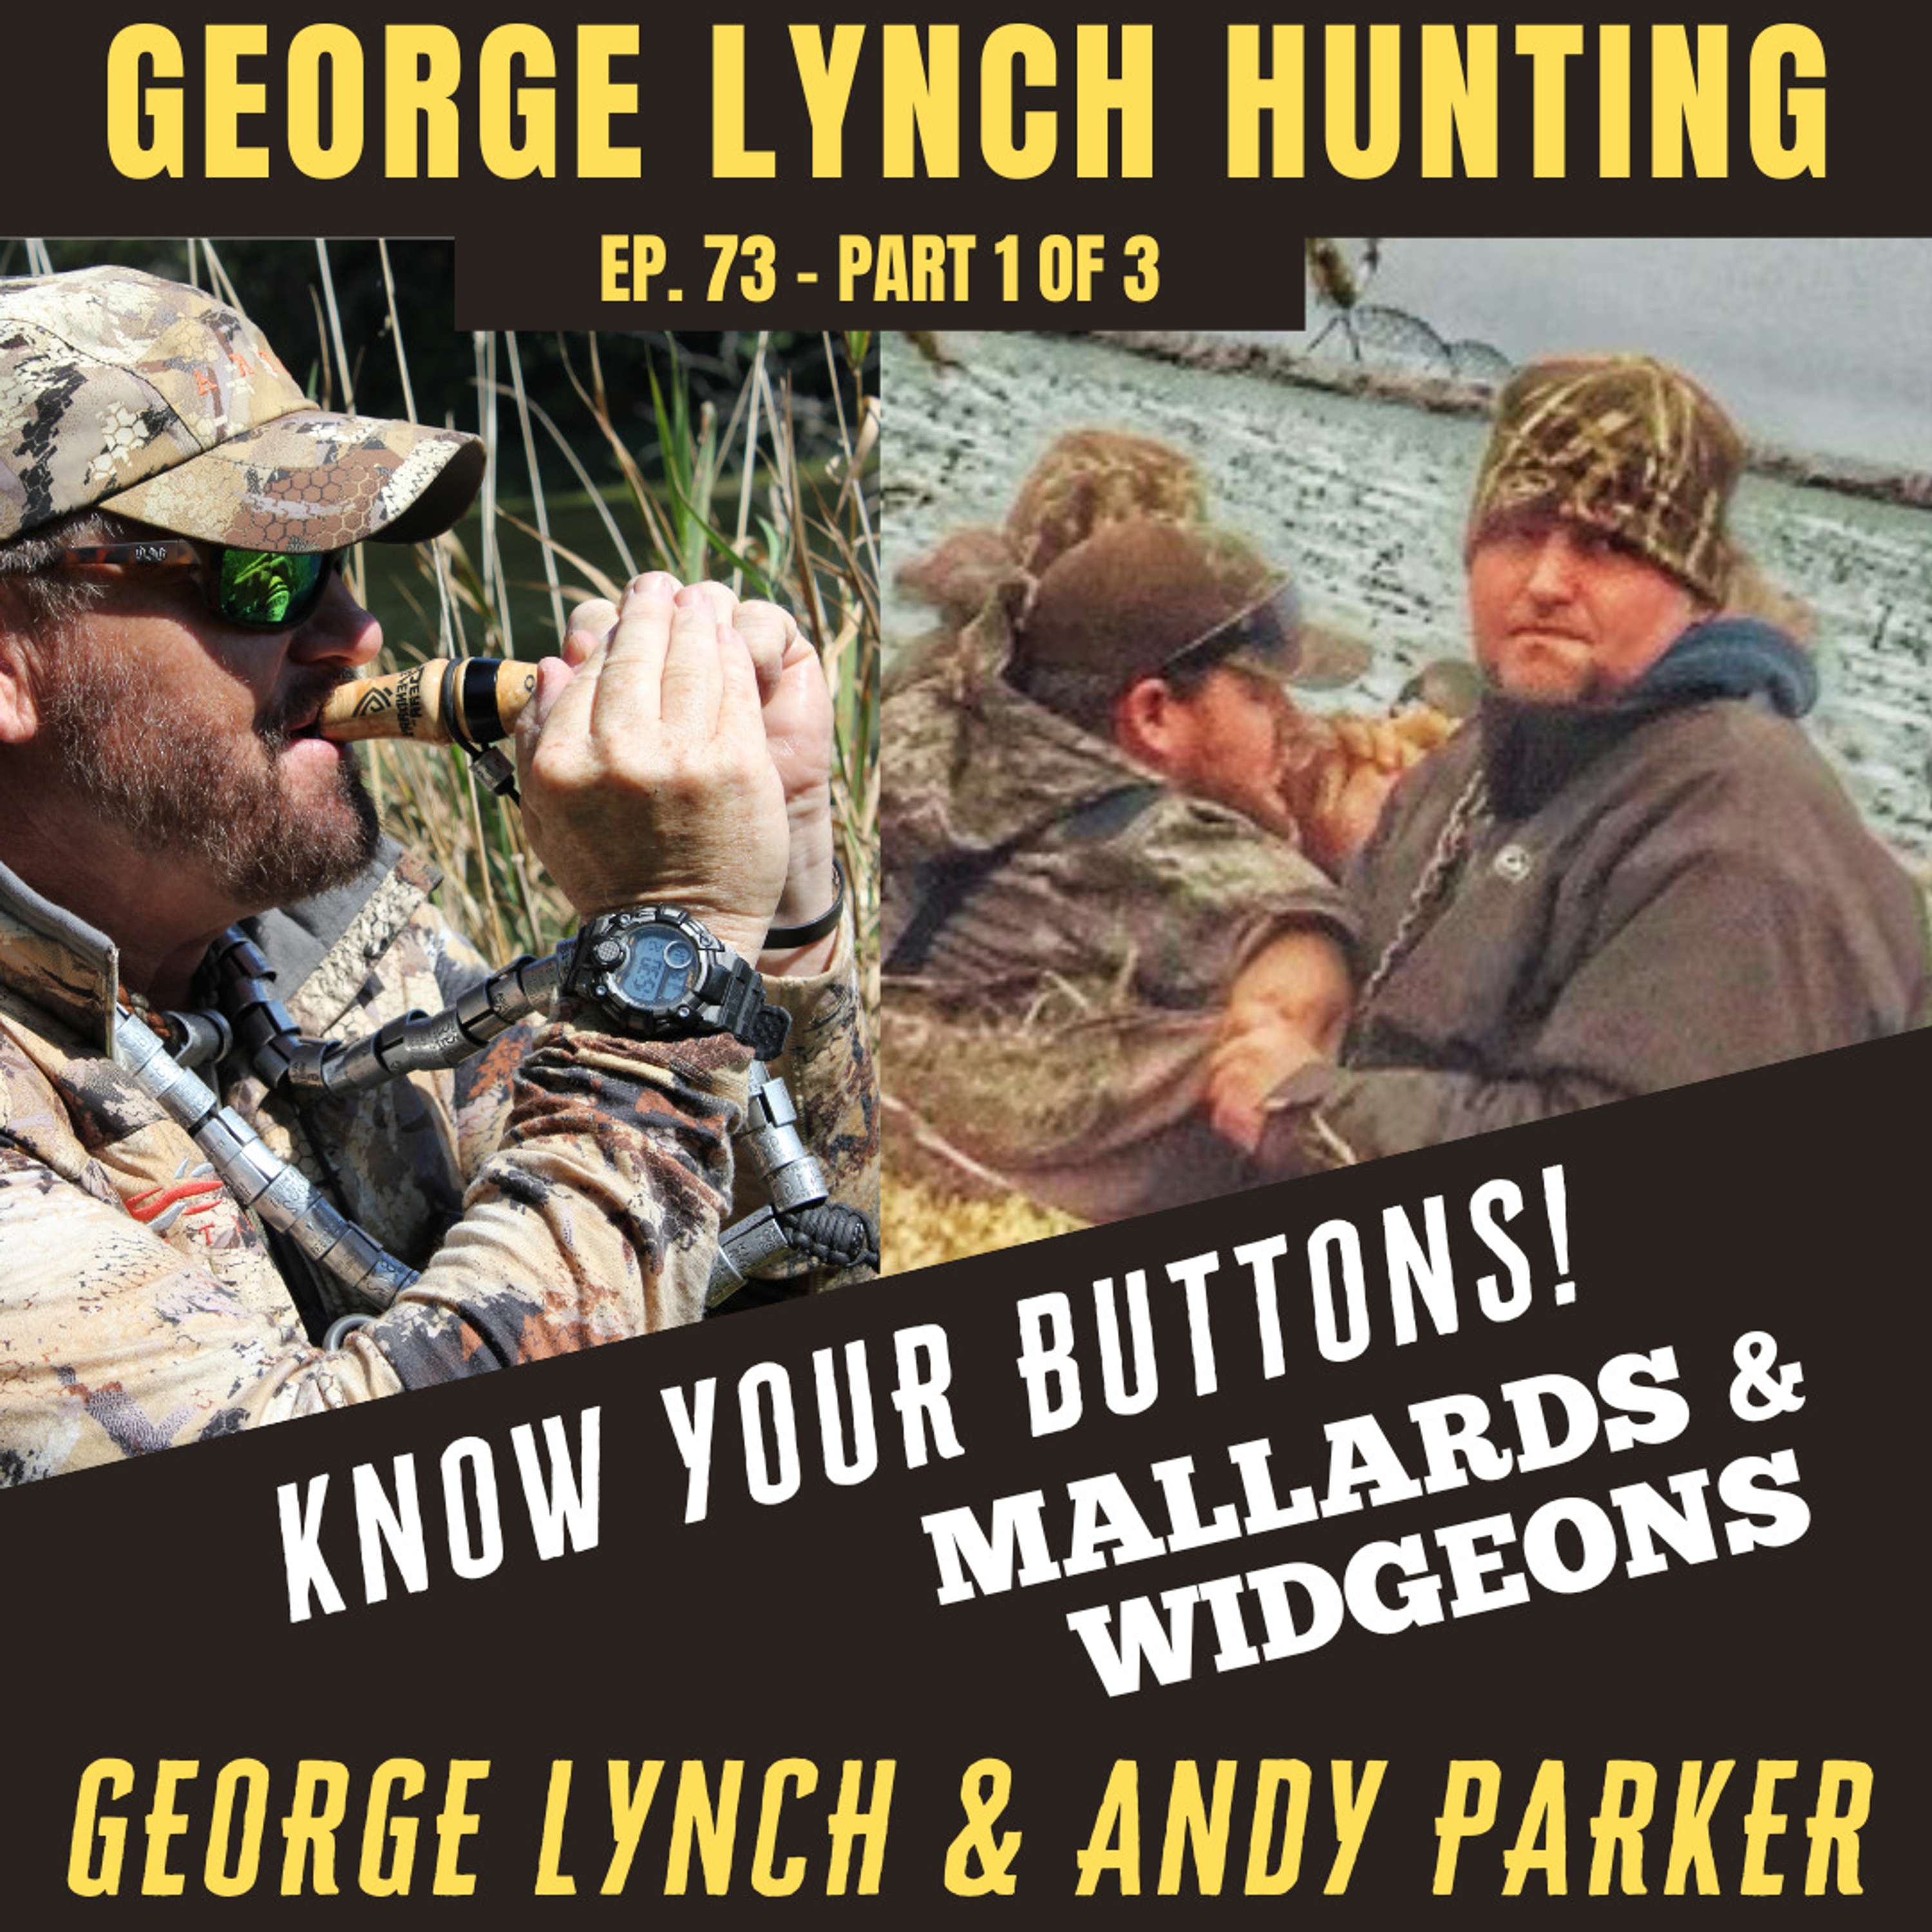 KNOW YOUR BUTTONS! MALLARD & WIDGEON CALLING! 1 of 3 with Andy Parker